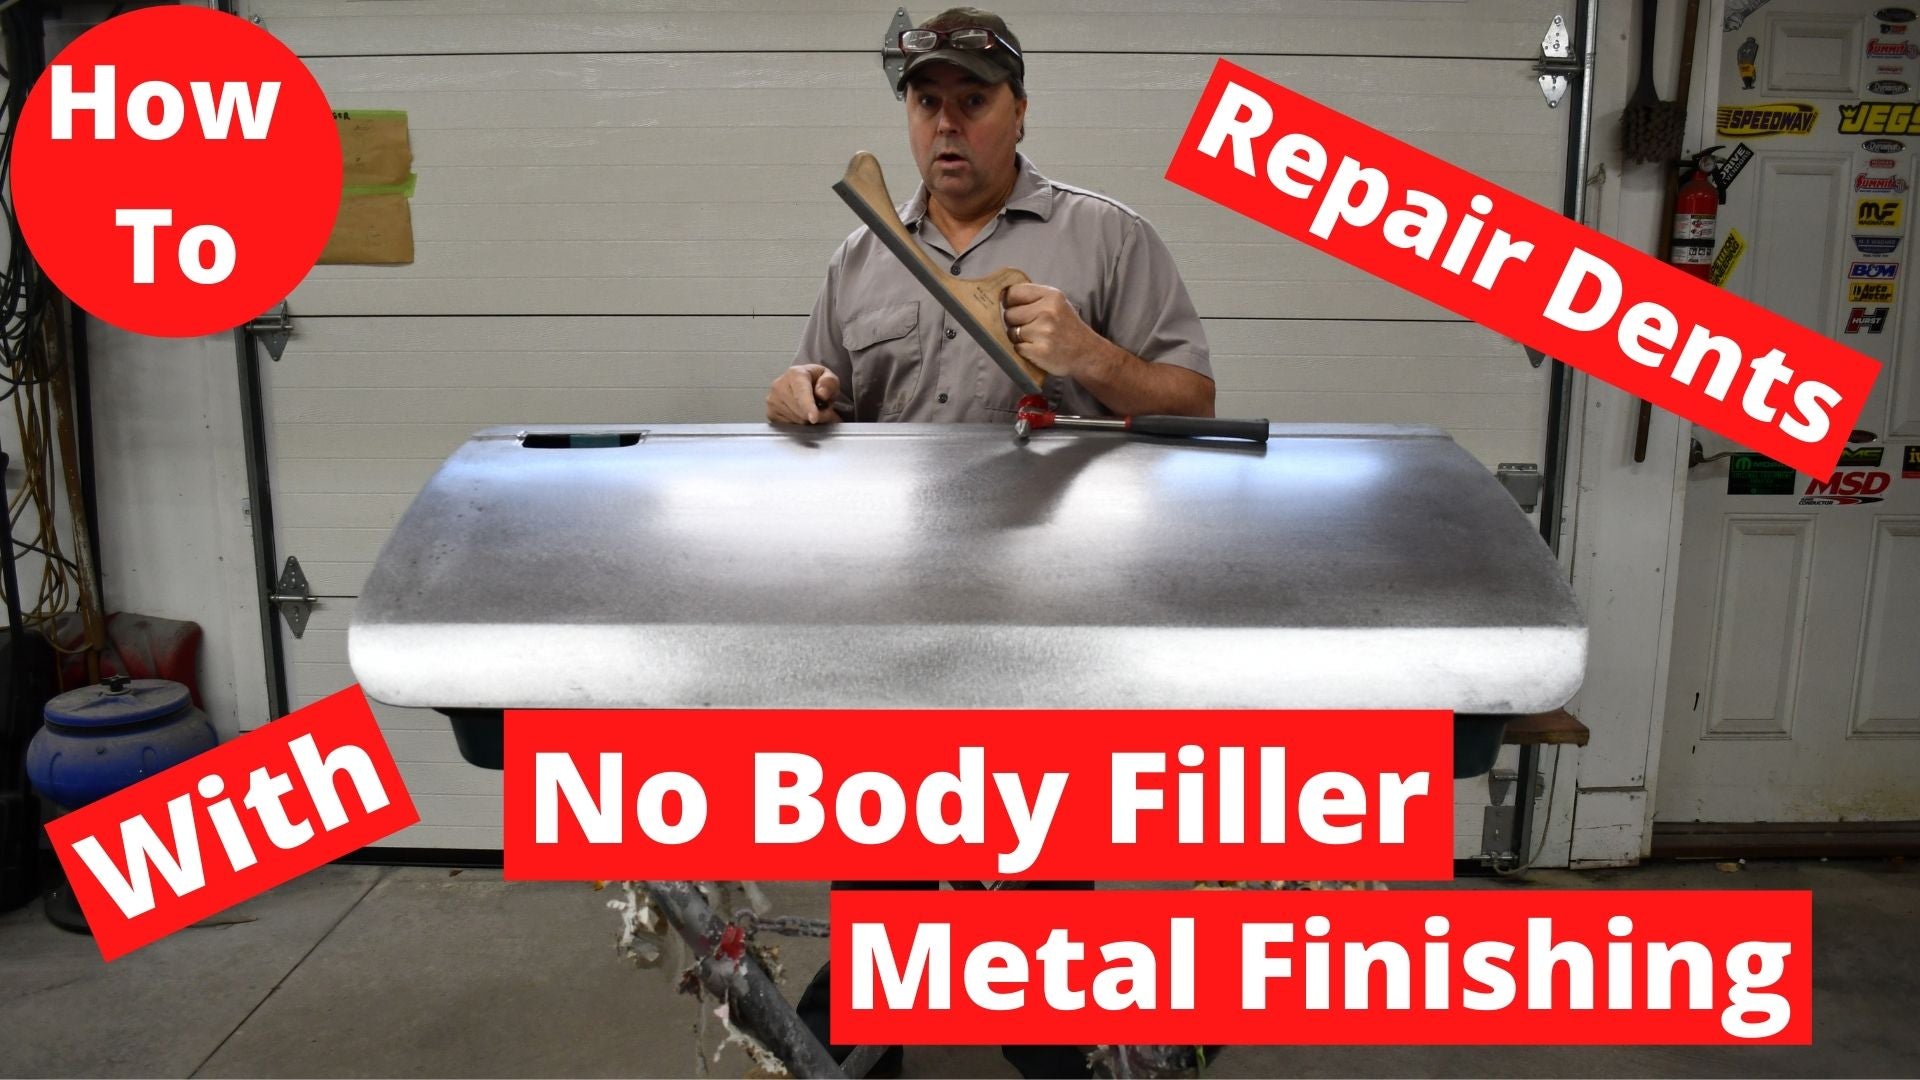 How To Auto Body Metal Finishing. Repair dents without Filler (Bondo)